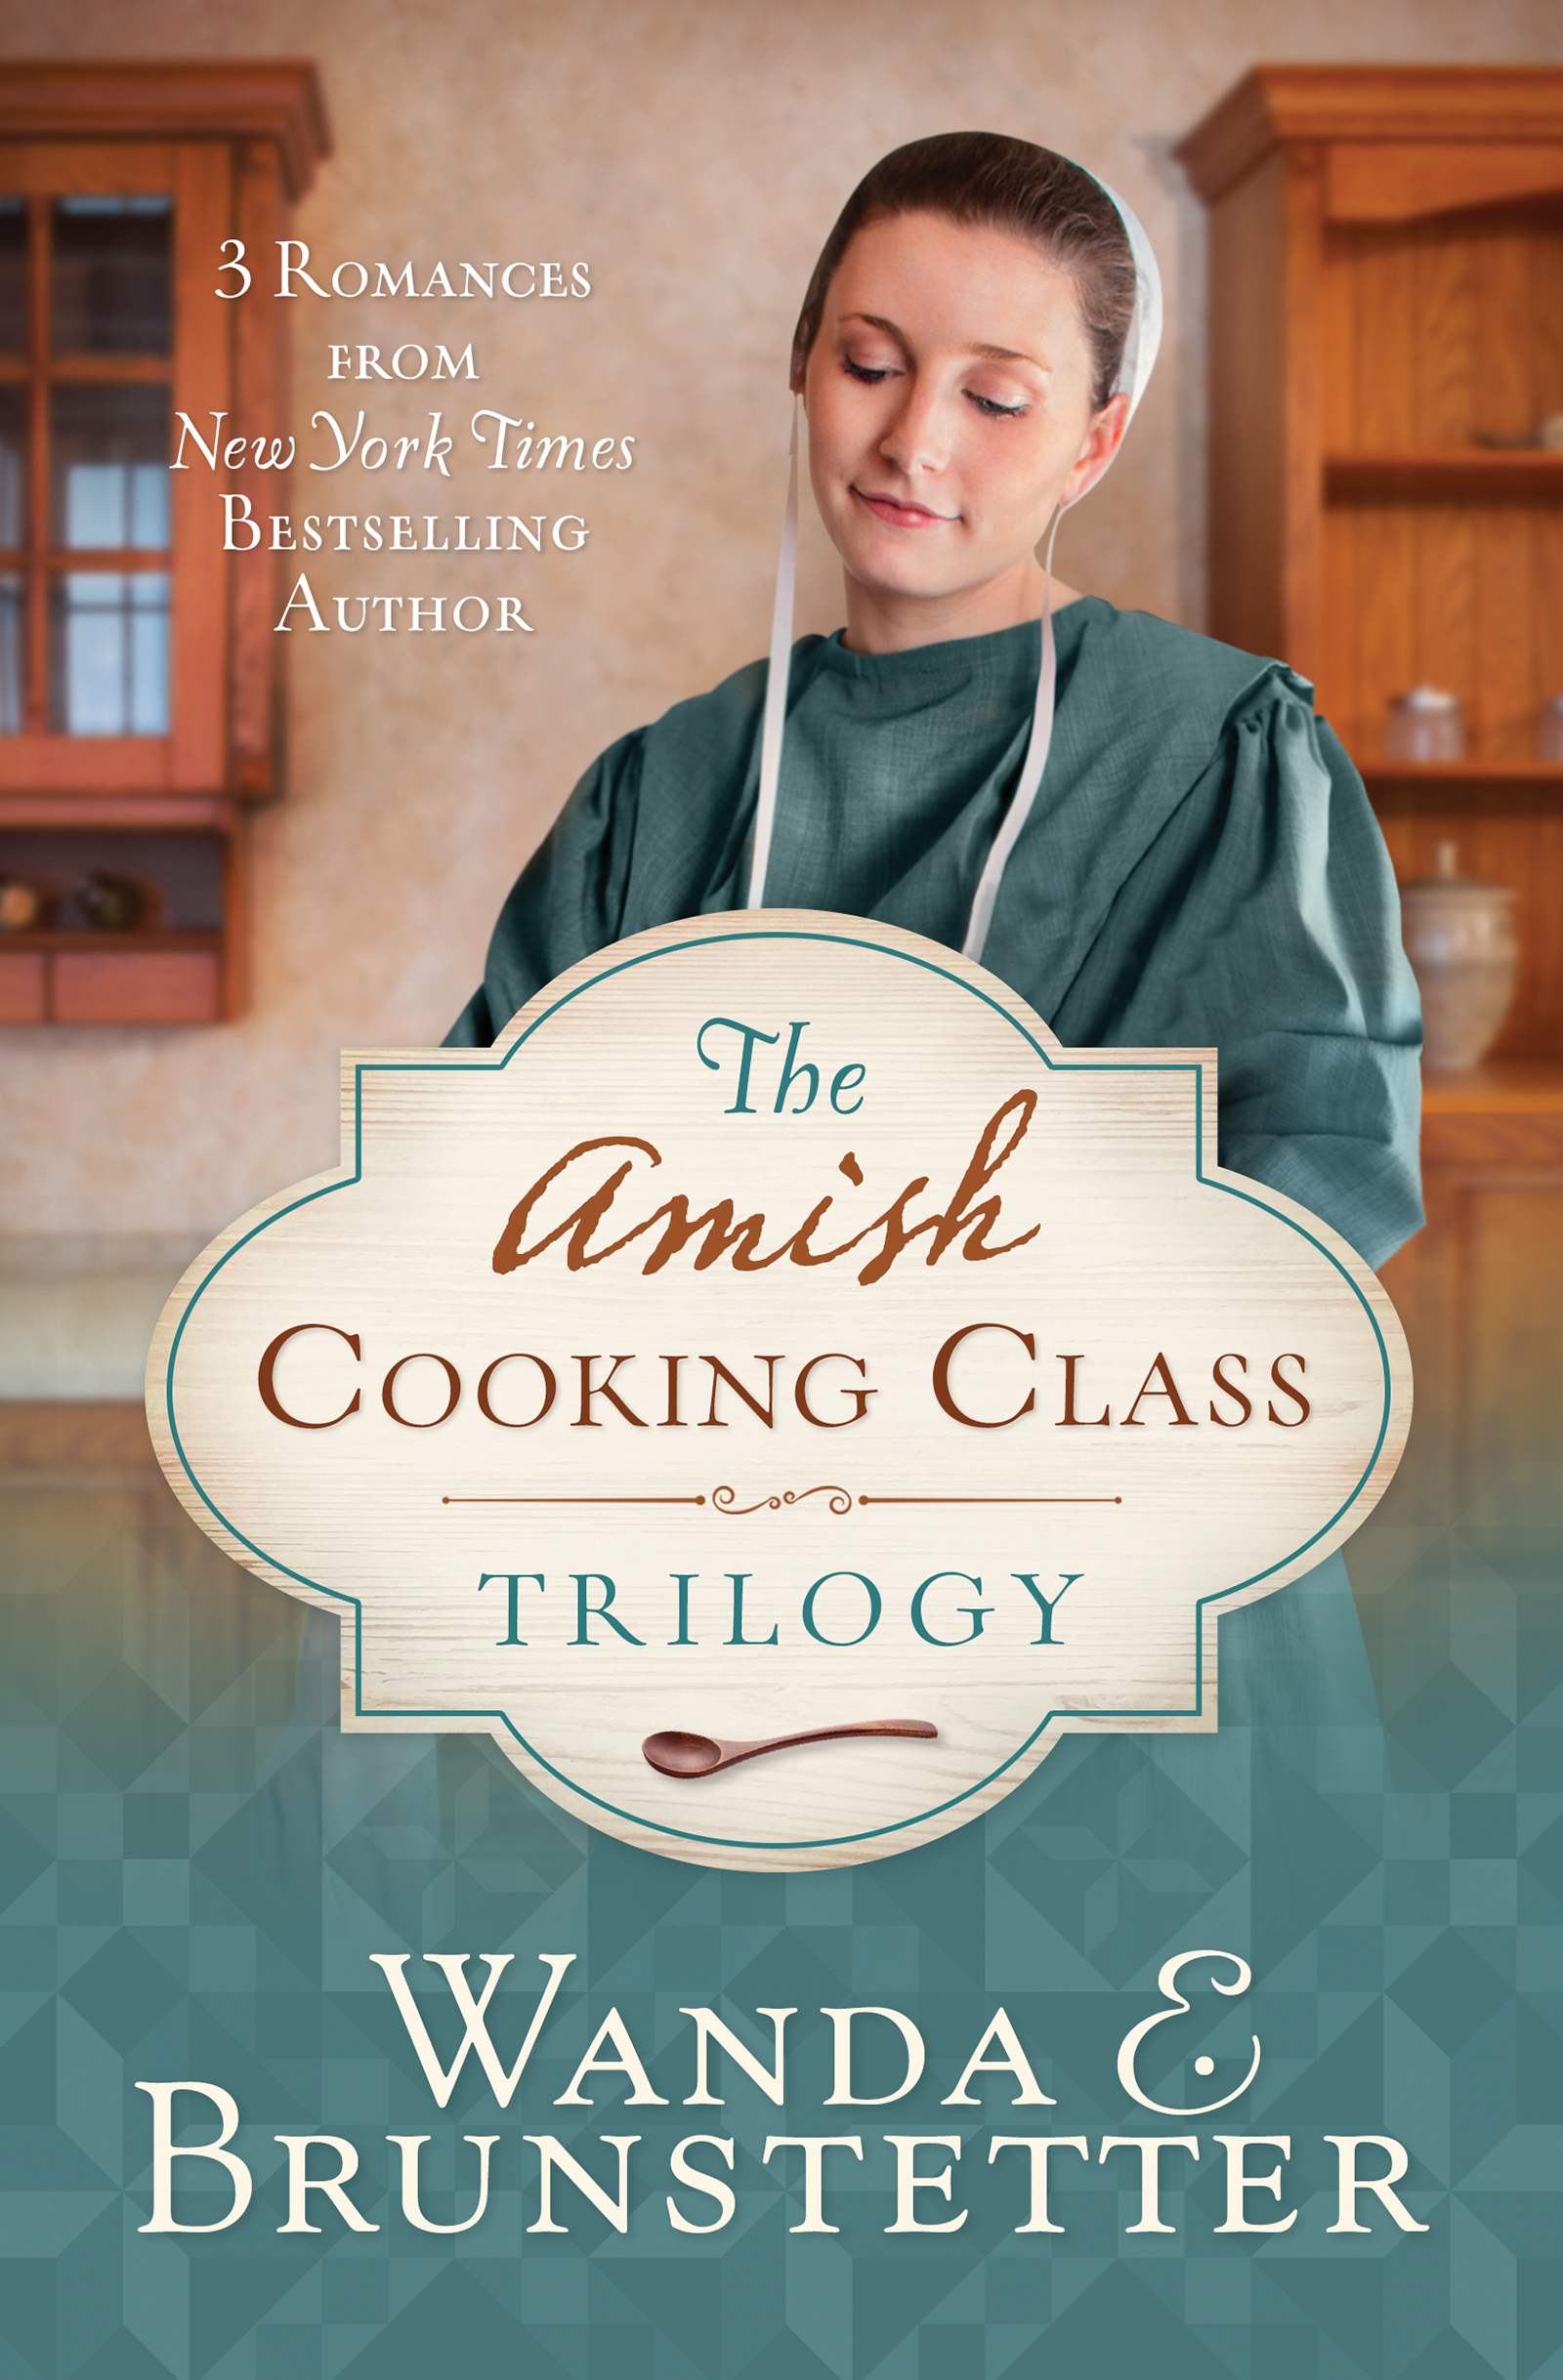 Image de couverture de The Amish Cooking Class Trilogy [electronic resource] : 3 Romances from a New York Times Bestselling Author